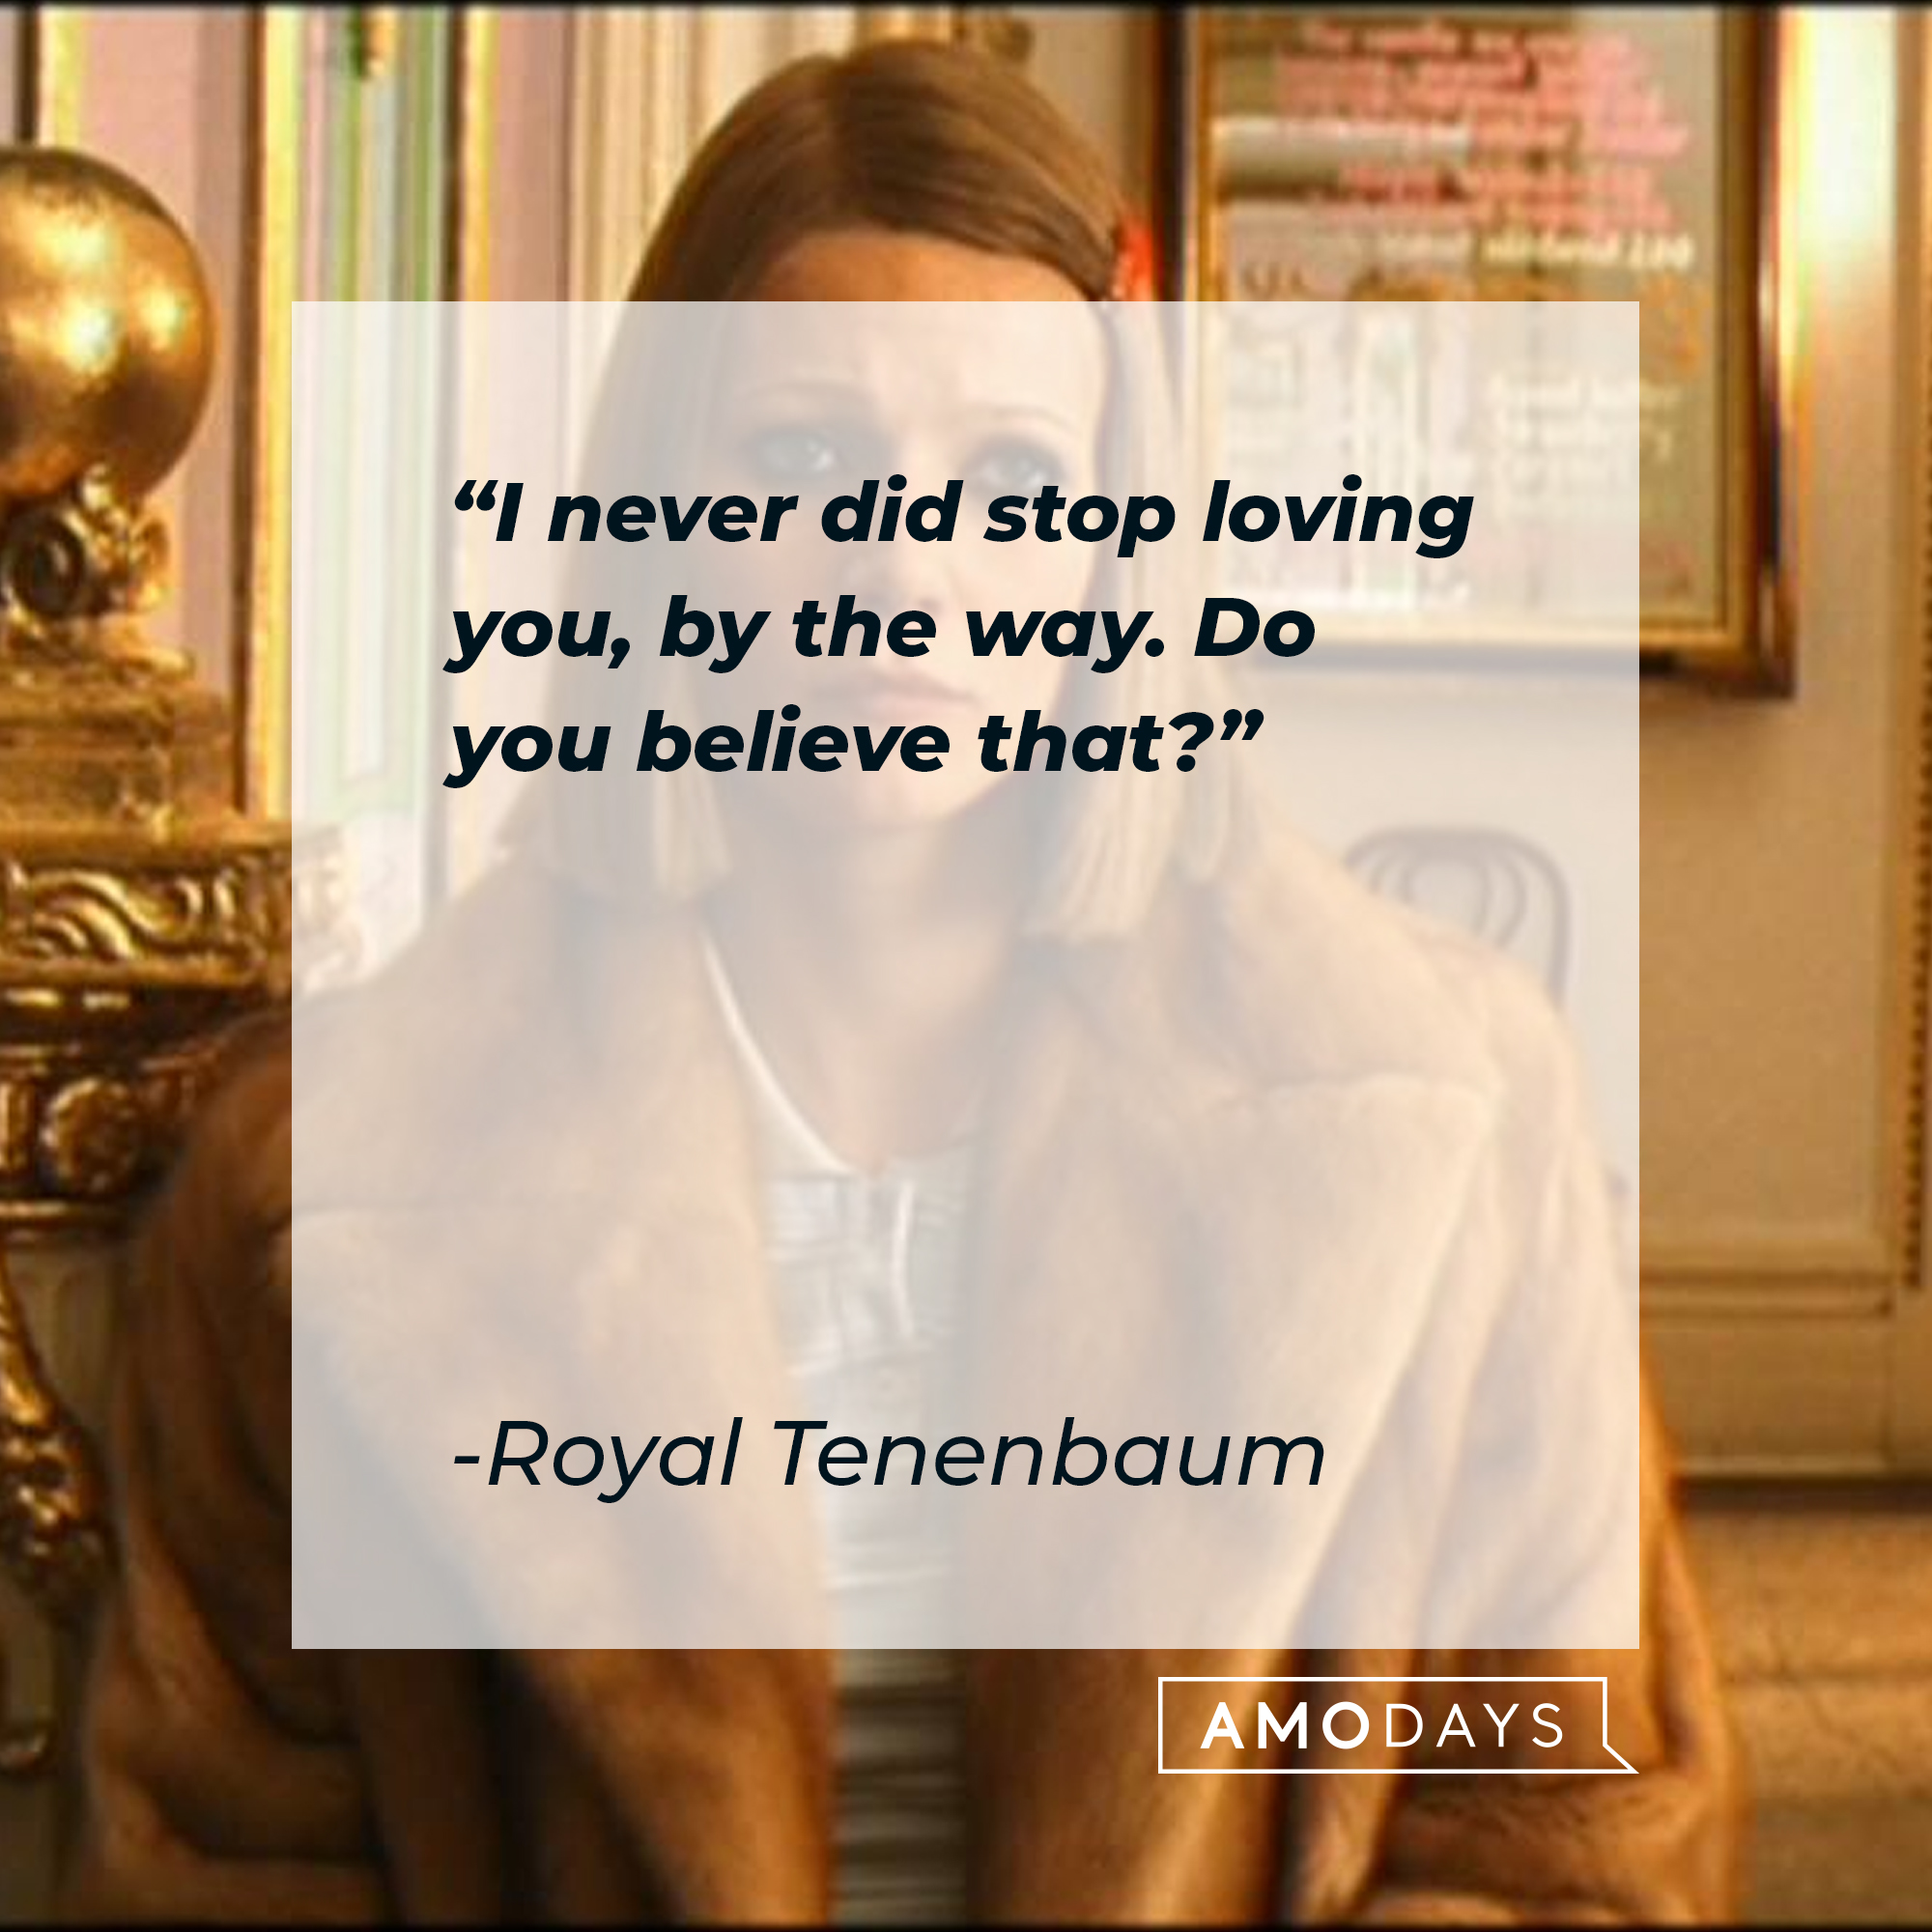 Royal Tenenbaum's quote: "I never did stop loving you, by the way. Do you believe that?" | Image: AmoDays